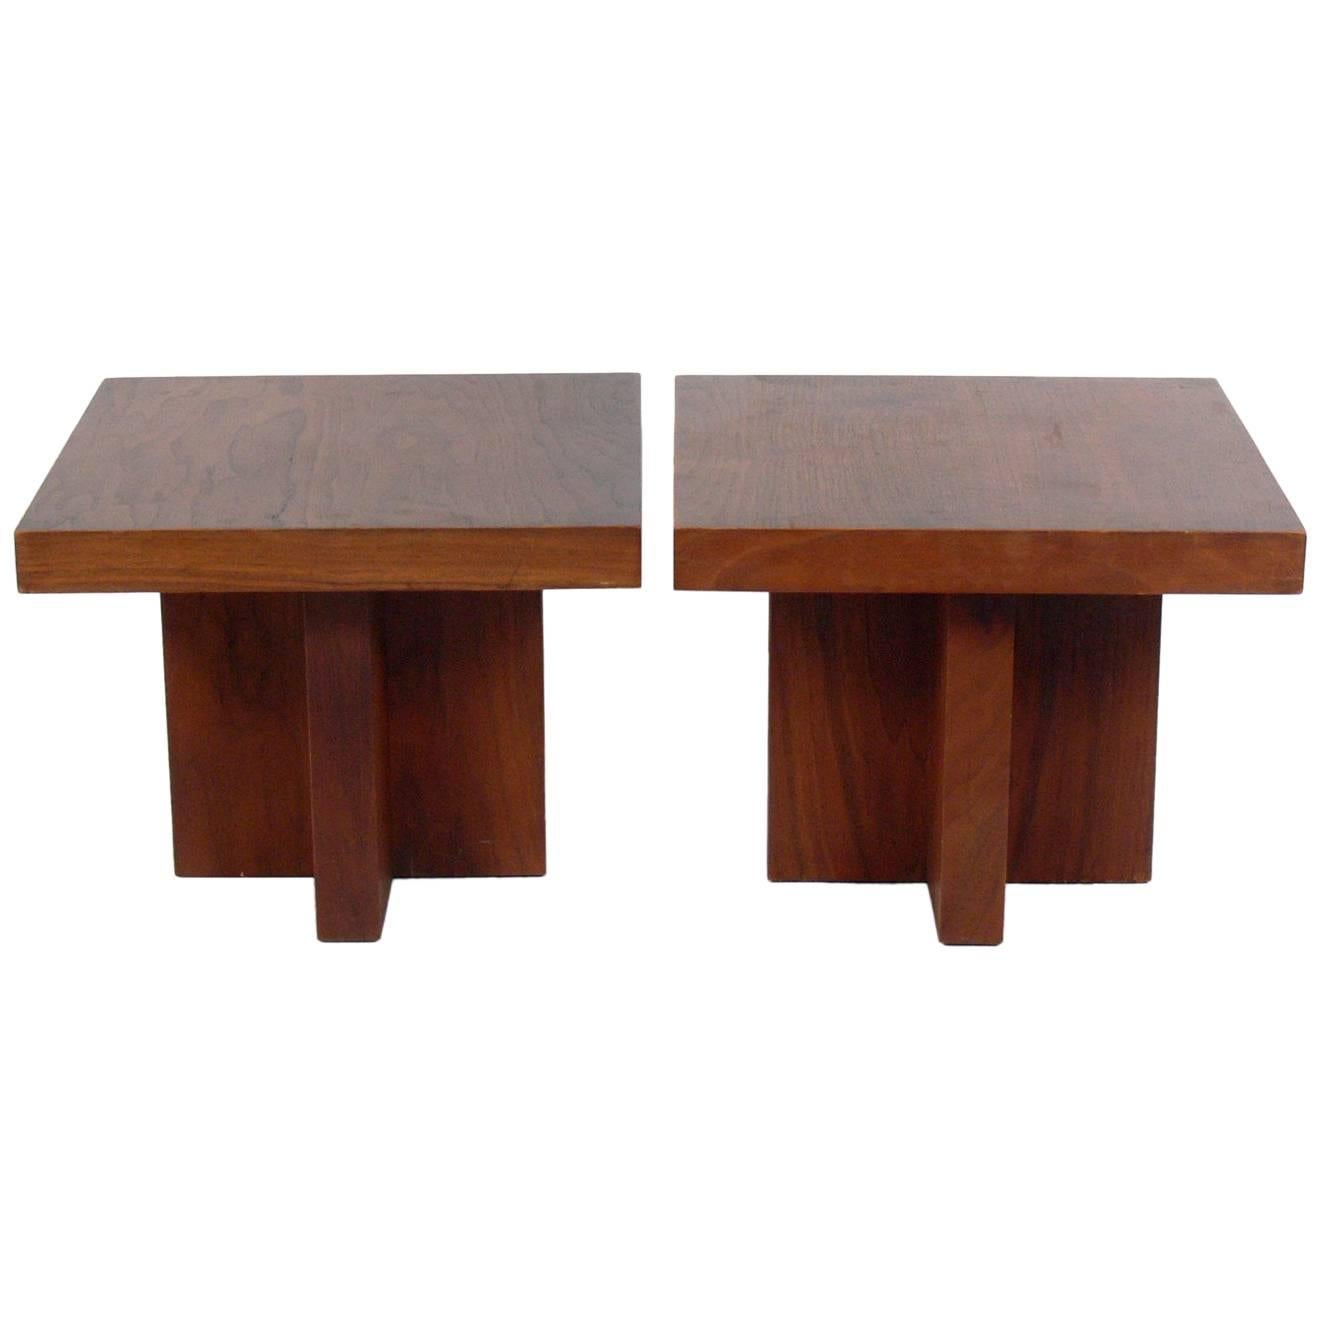 Pair of Clean Lined Walnut End Tables by Milo Baughman